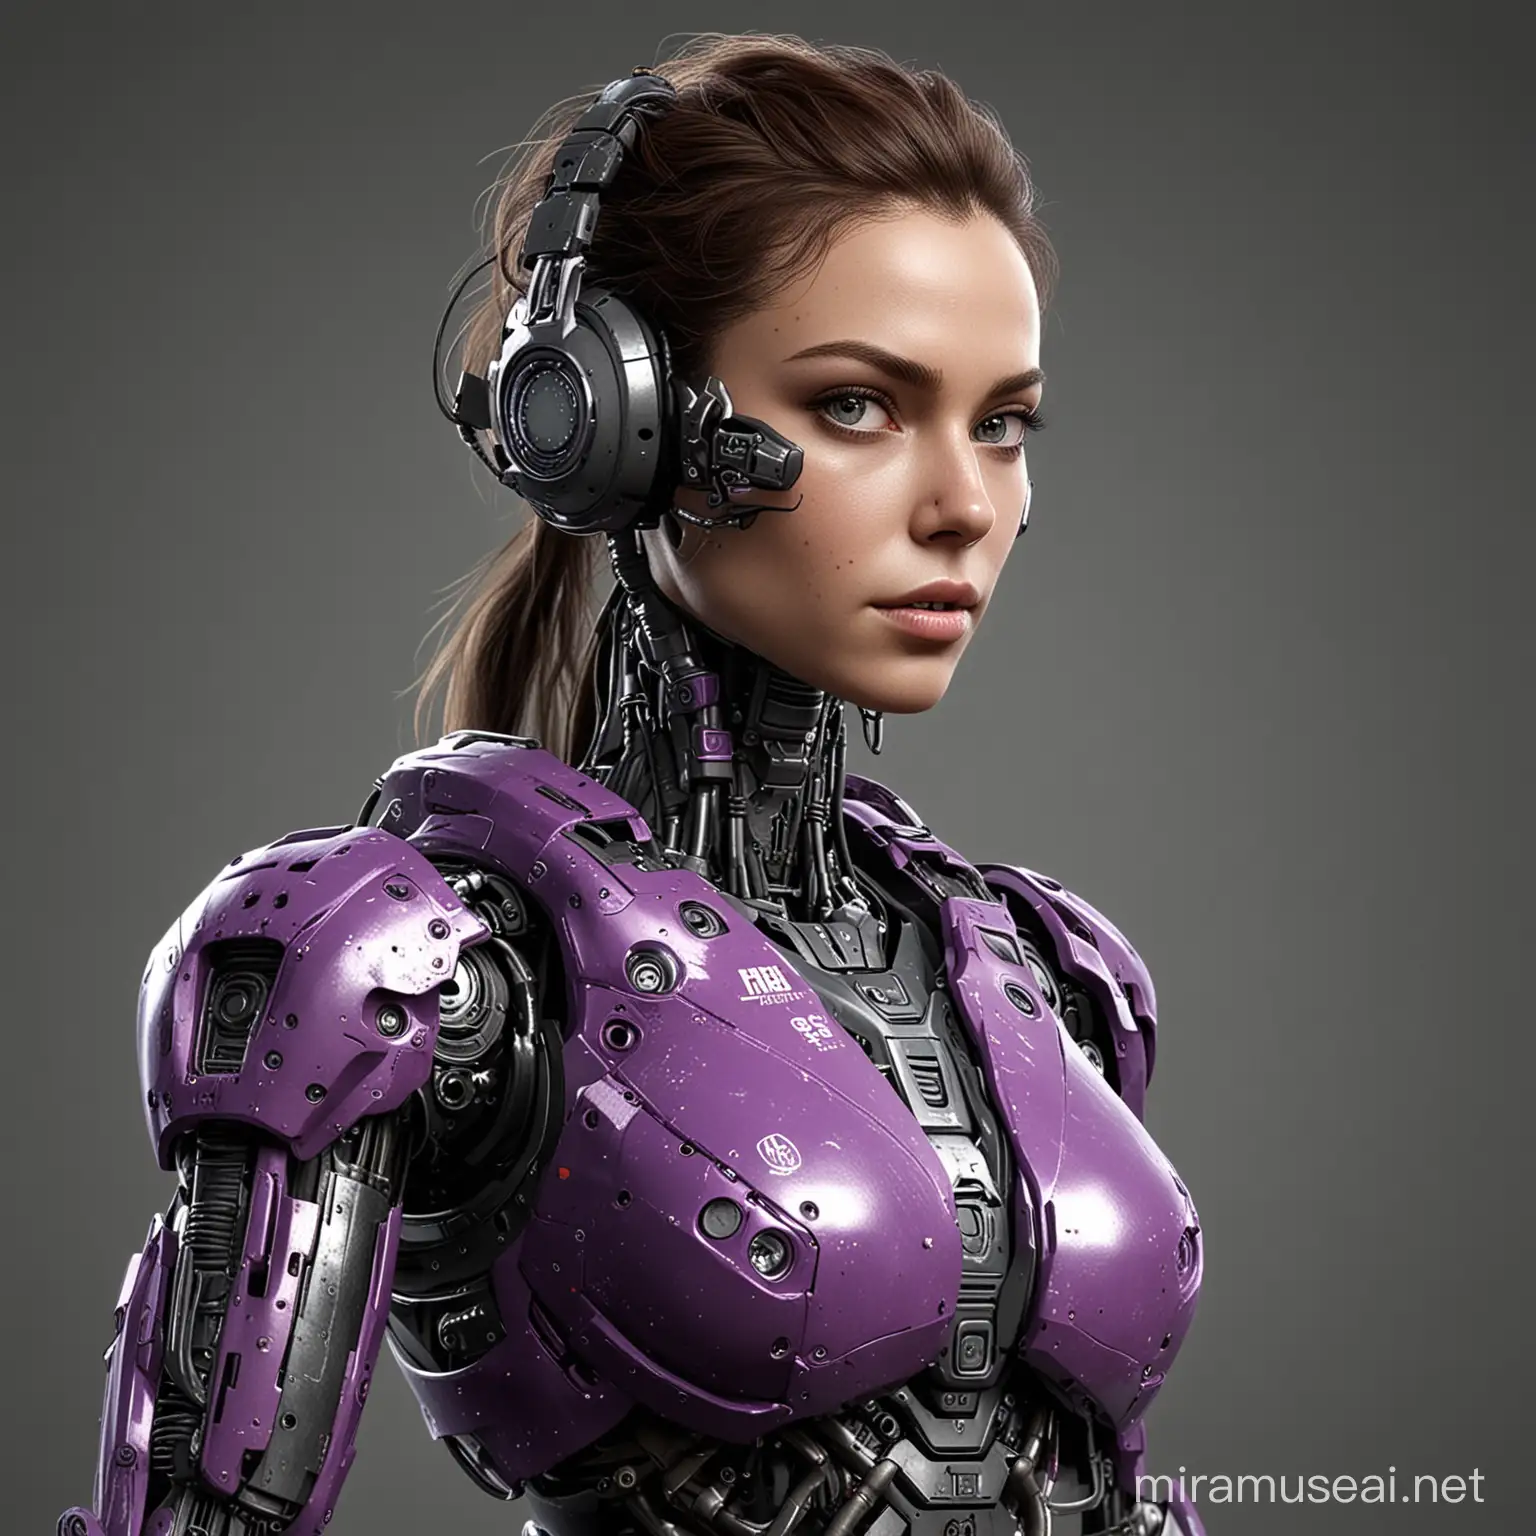 Futuristic Cybernetic Woman Engages in Action Inspired by Call of Duty in Purple Environment